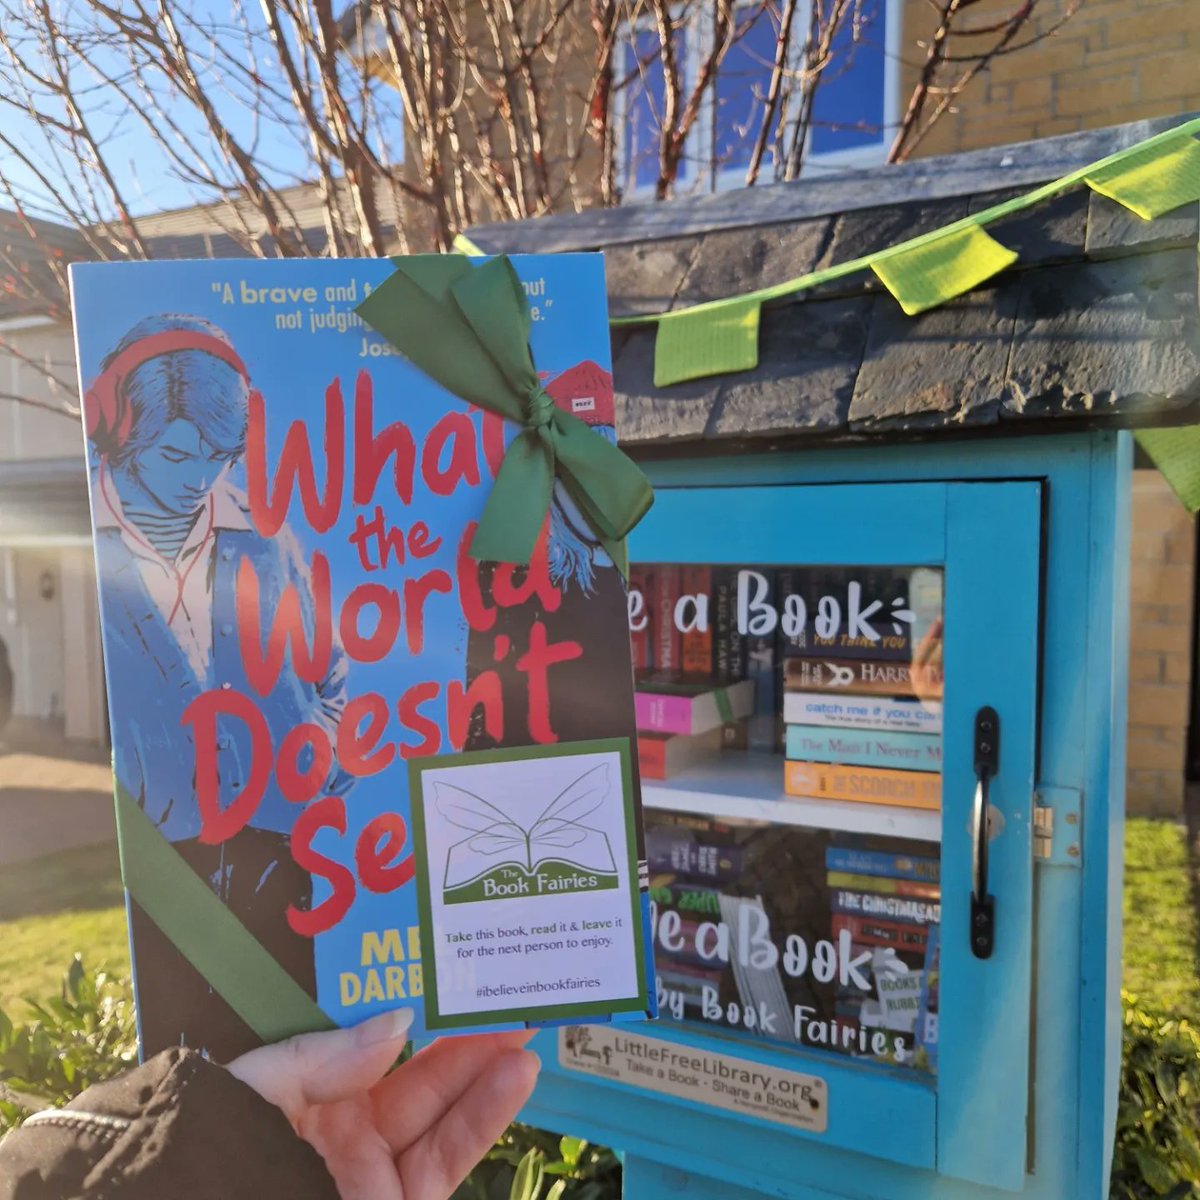 A copy of What The World Doesn't See? by Mel Darbon has been left in the Little Book House in Dunfermline. Will you be the lucky finder? #IBelieveInBookFairies 
#InternationalWomensDay
#BookFairyBirthday #BookFairiesTurn6
#BookFairiesWorldwide